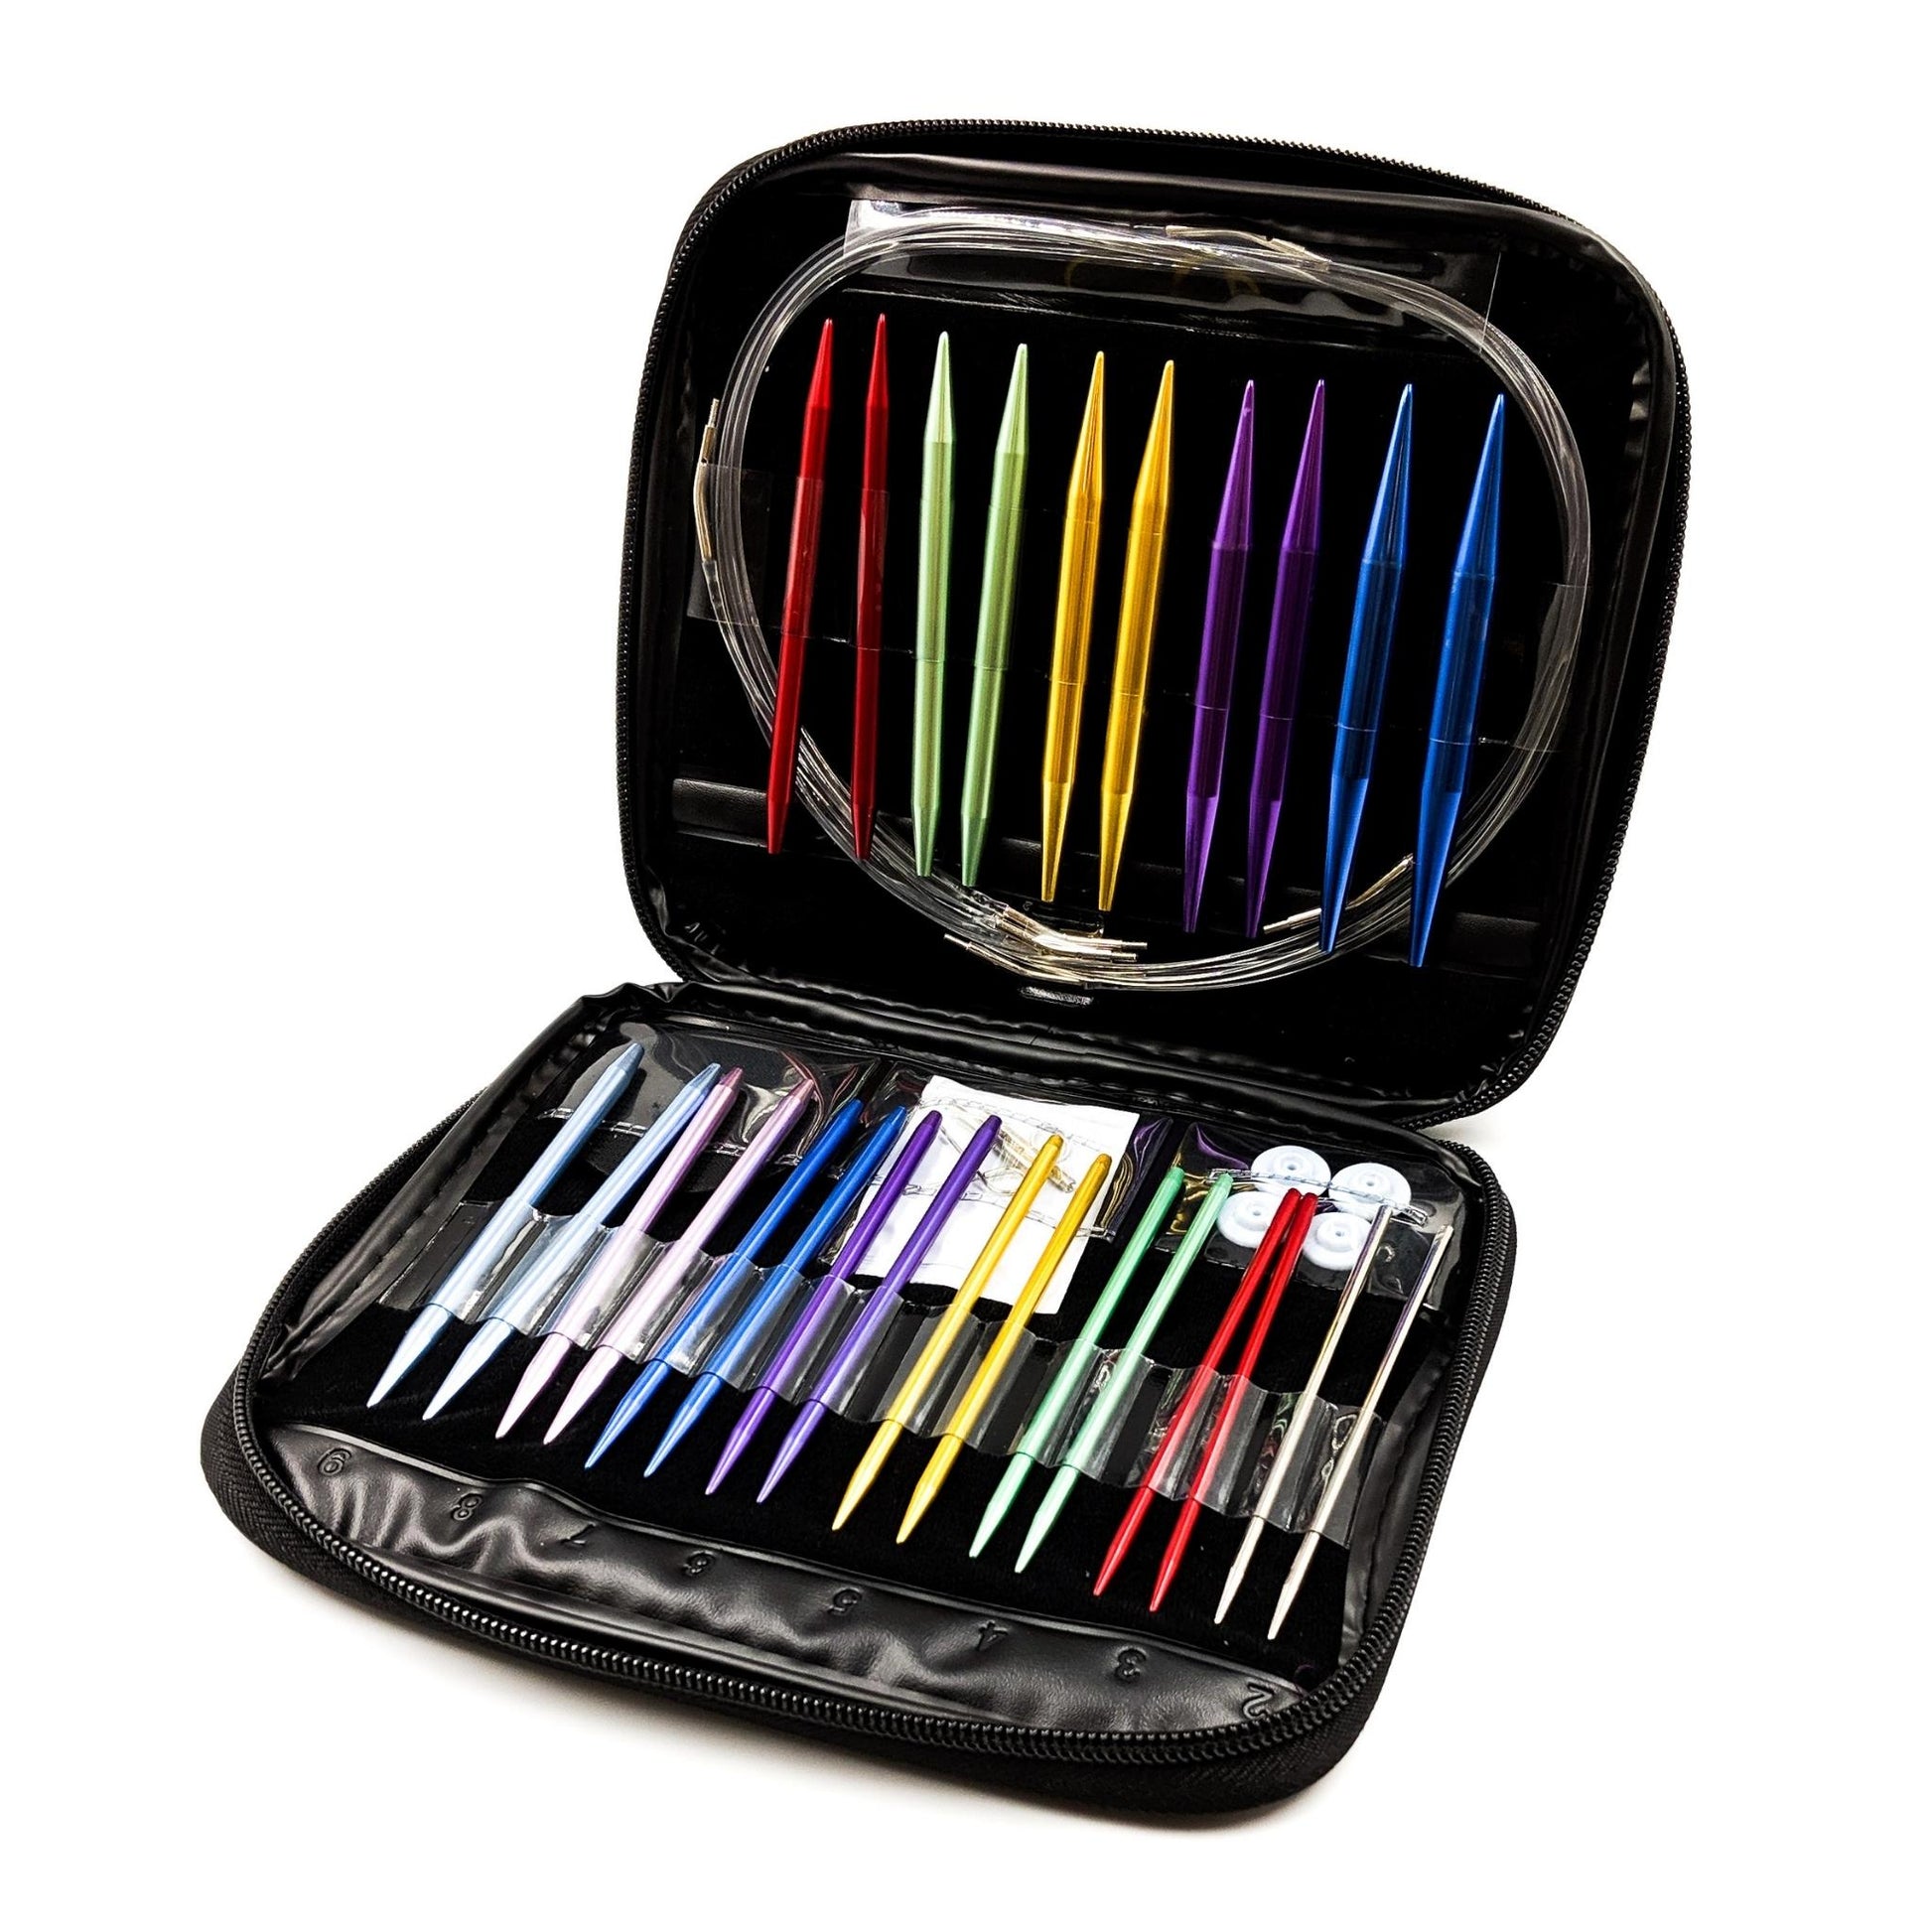 An open Aluminum interchangeable Knitting Needle Set. There are 13 sets of knitting needles in a variety of colors. Easy to change out.